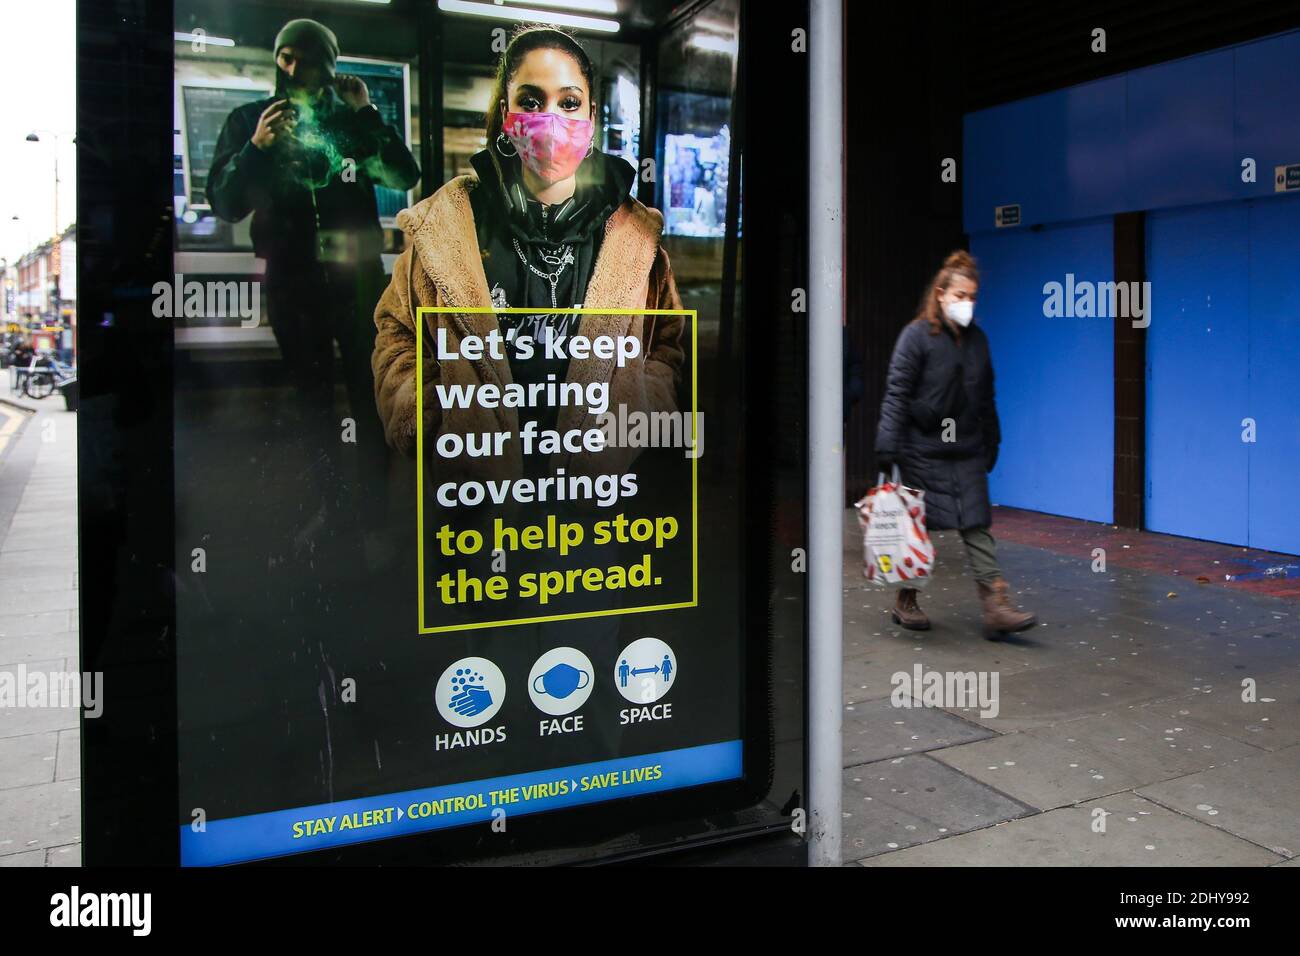 A woman wearing a face mask walks past a COIVD-19 public information campaign digital poster on display in London. Stock Photo